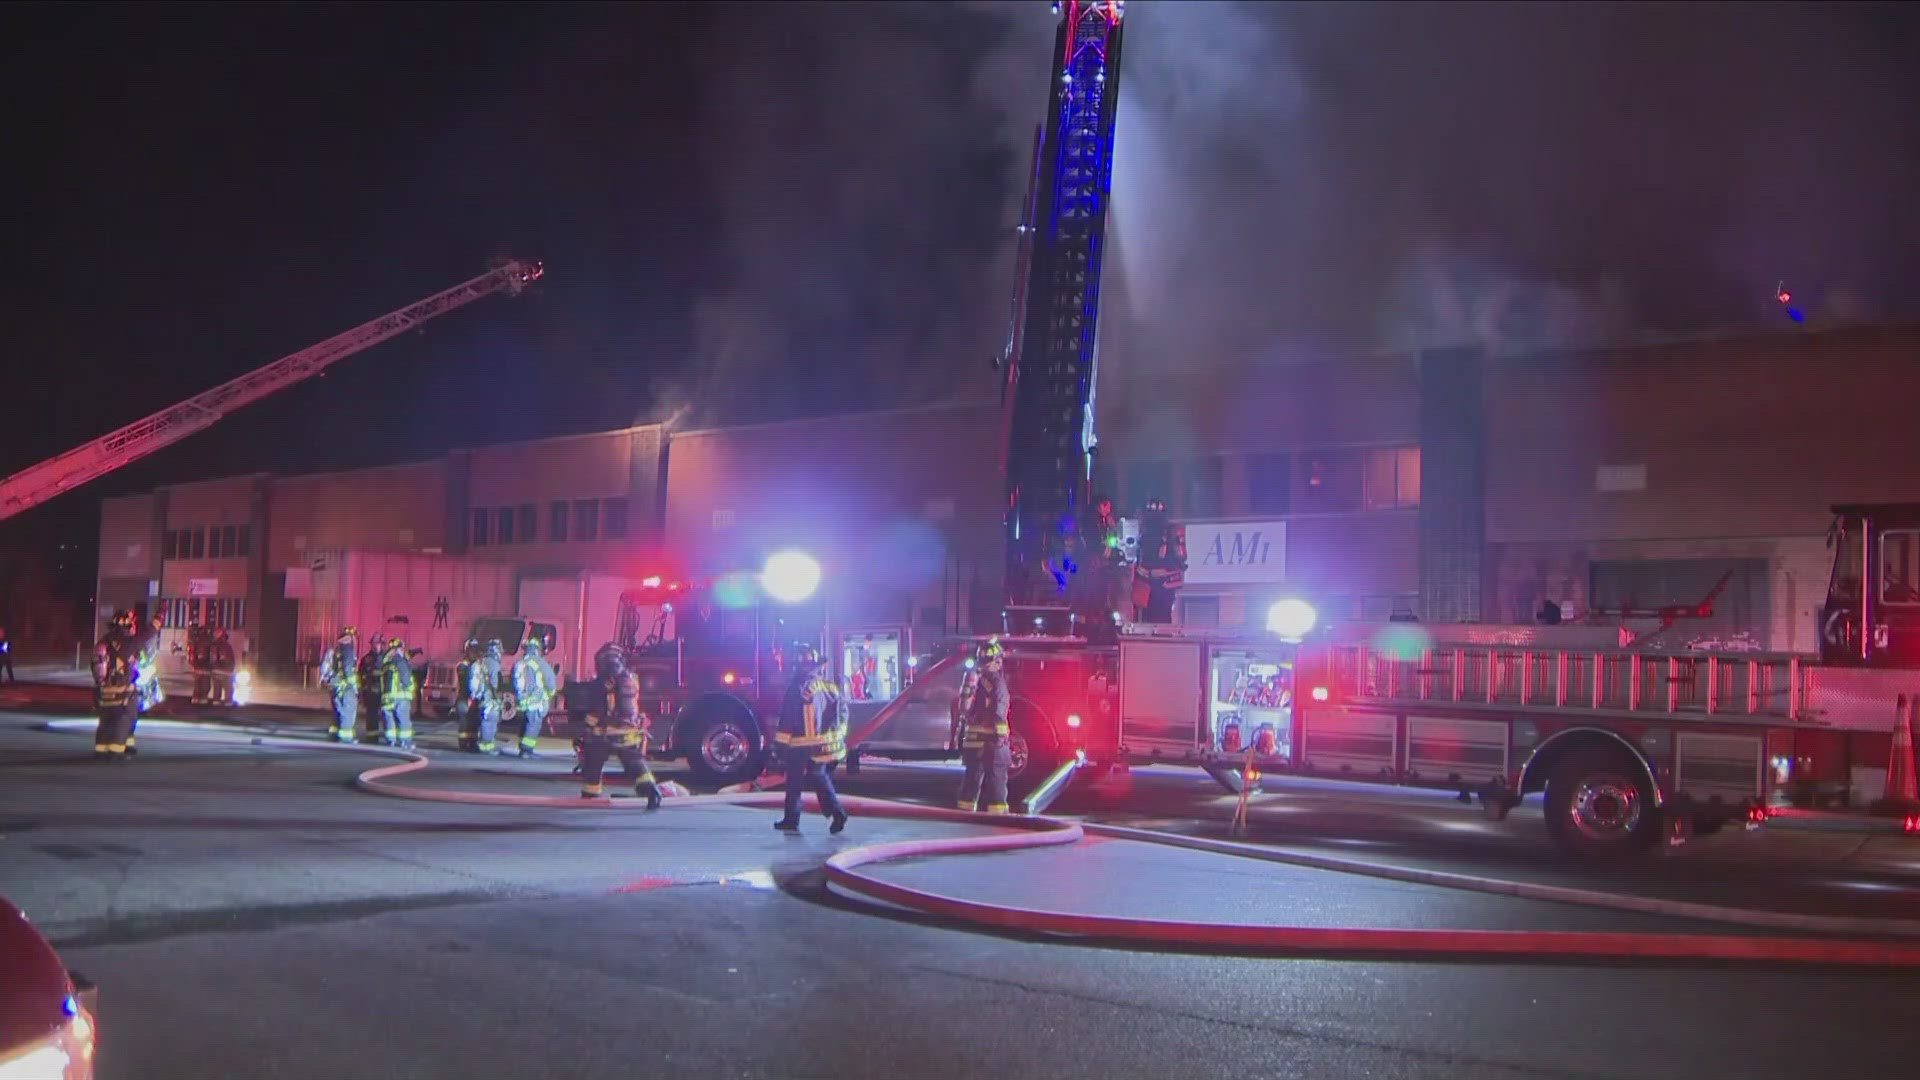 Two nights ago, we were live on the scene of this warehouse fire in Alexandria. The heavy flames damaged the building and businesses located there.